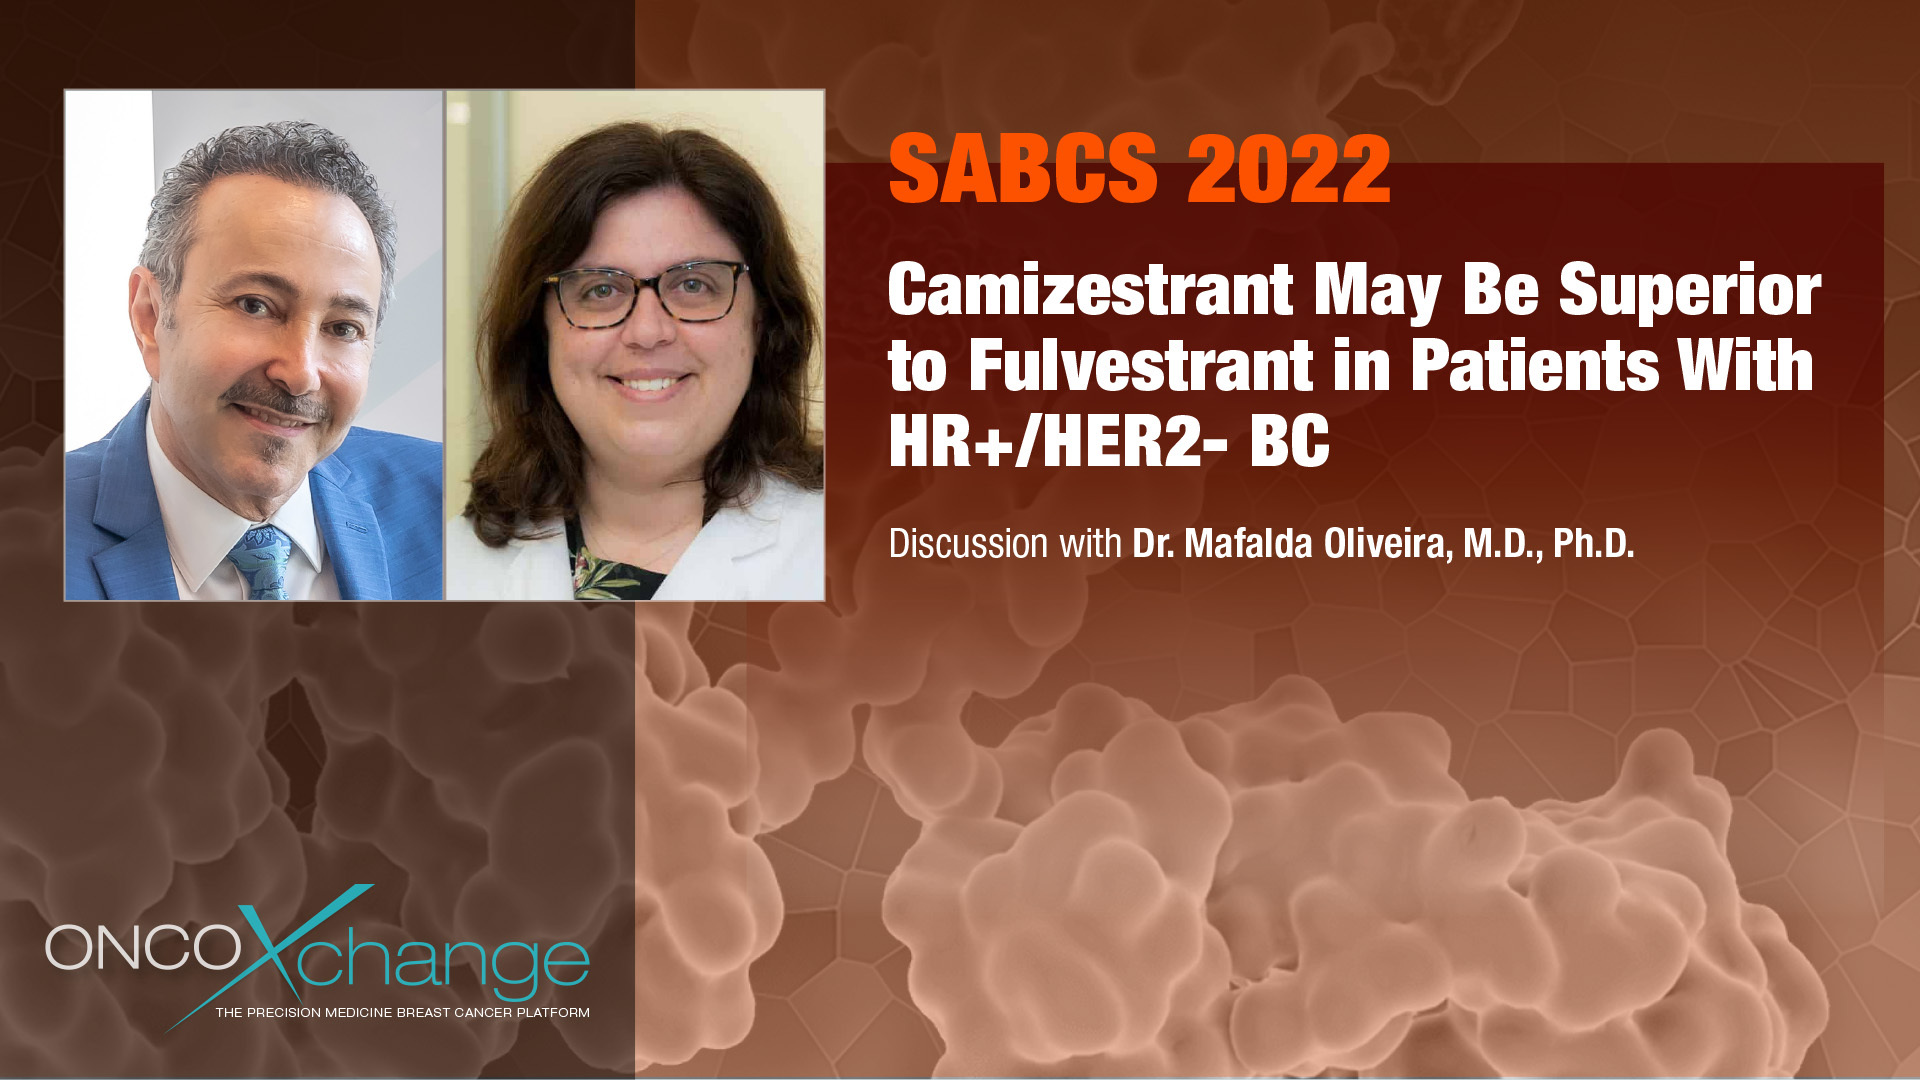 SABCS 2022 - Camizestrant May Be Superior to Fulvestrant in Patients With HR+/HER2- BC